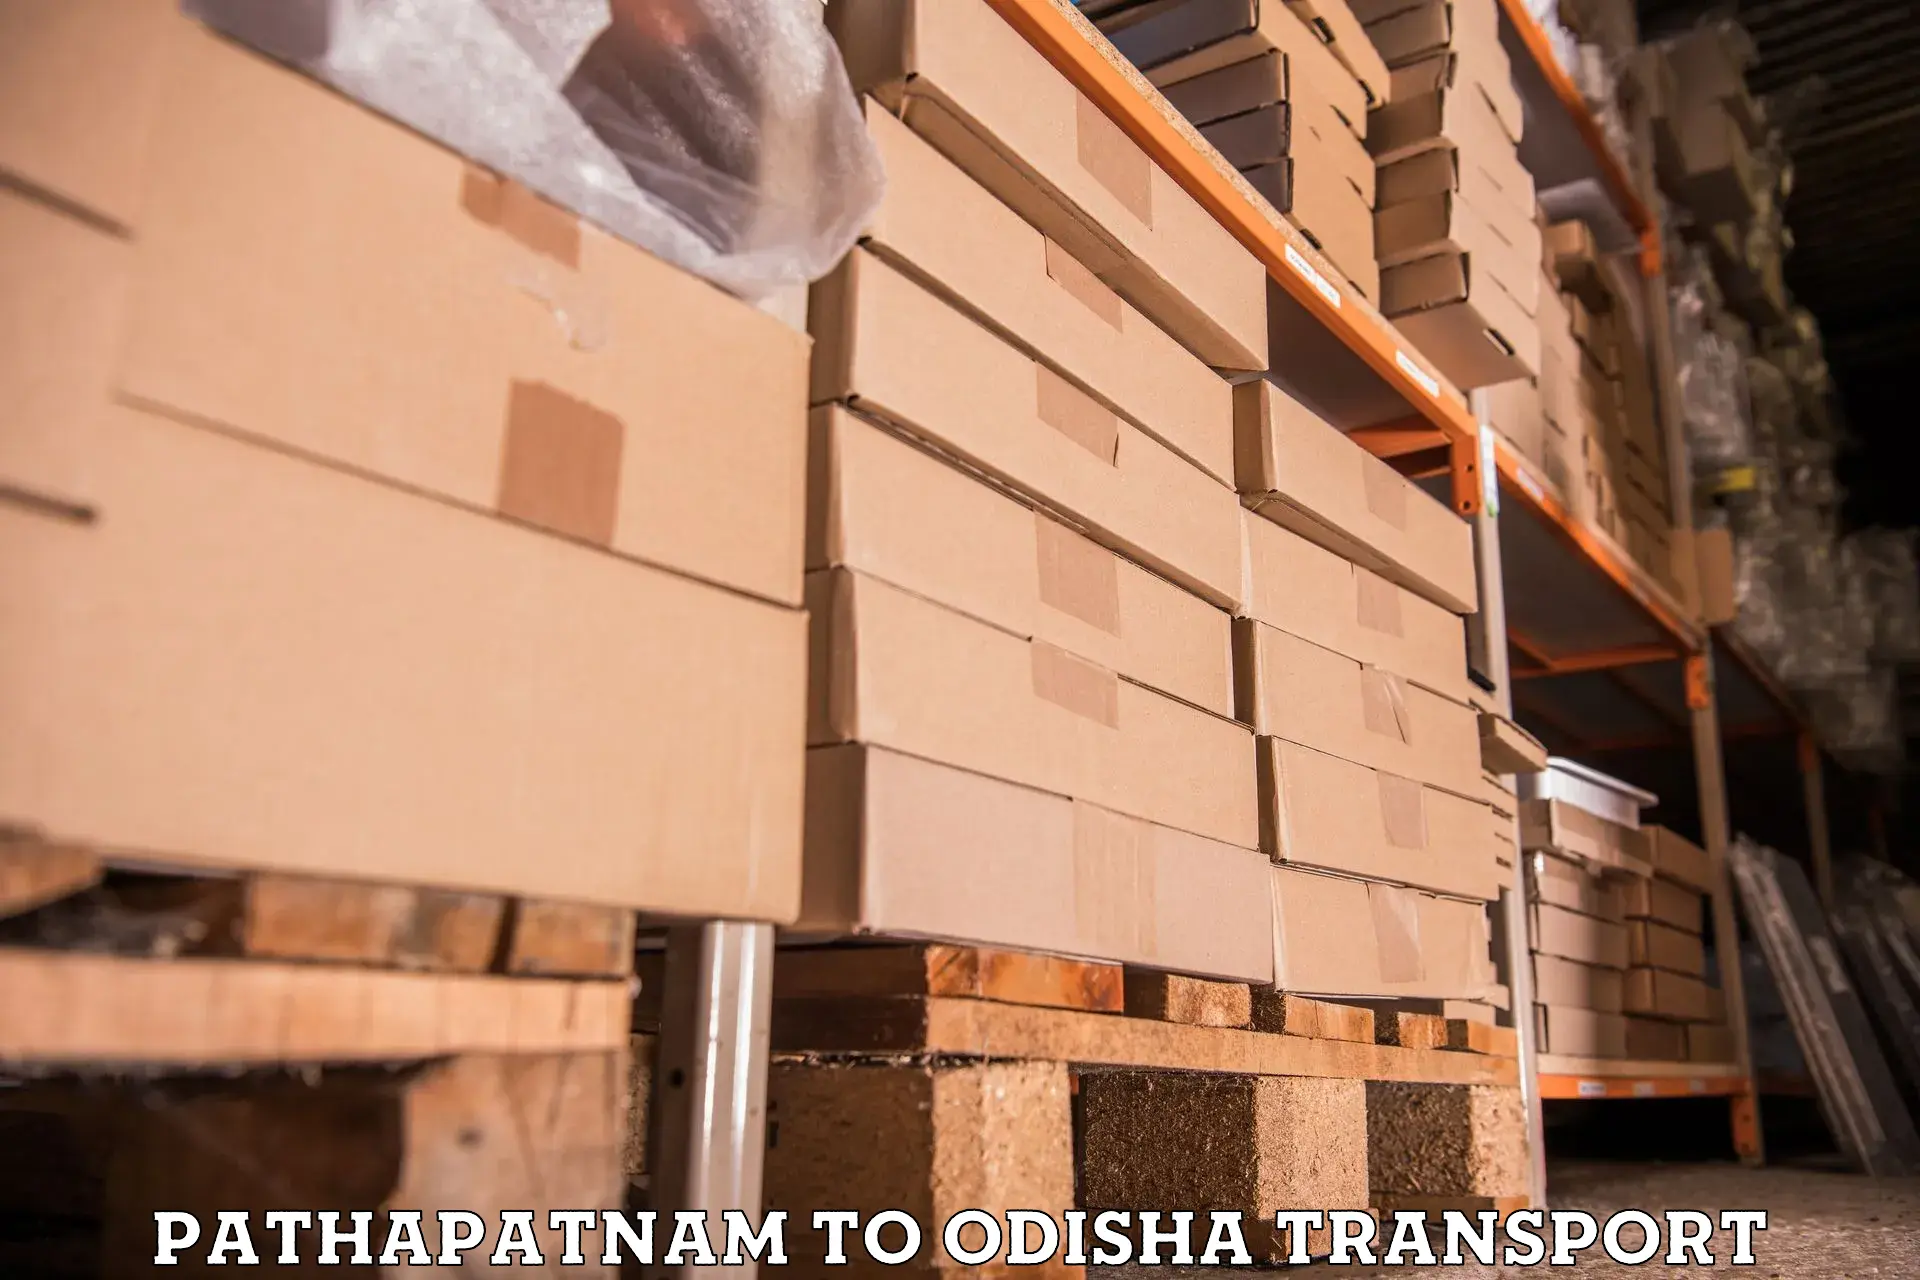 Shipping partner Pathapatnam to Cuttack